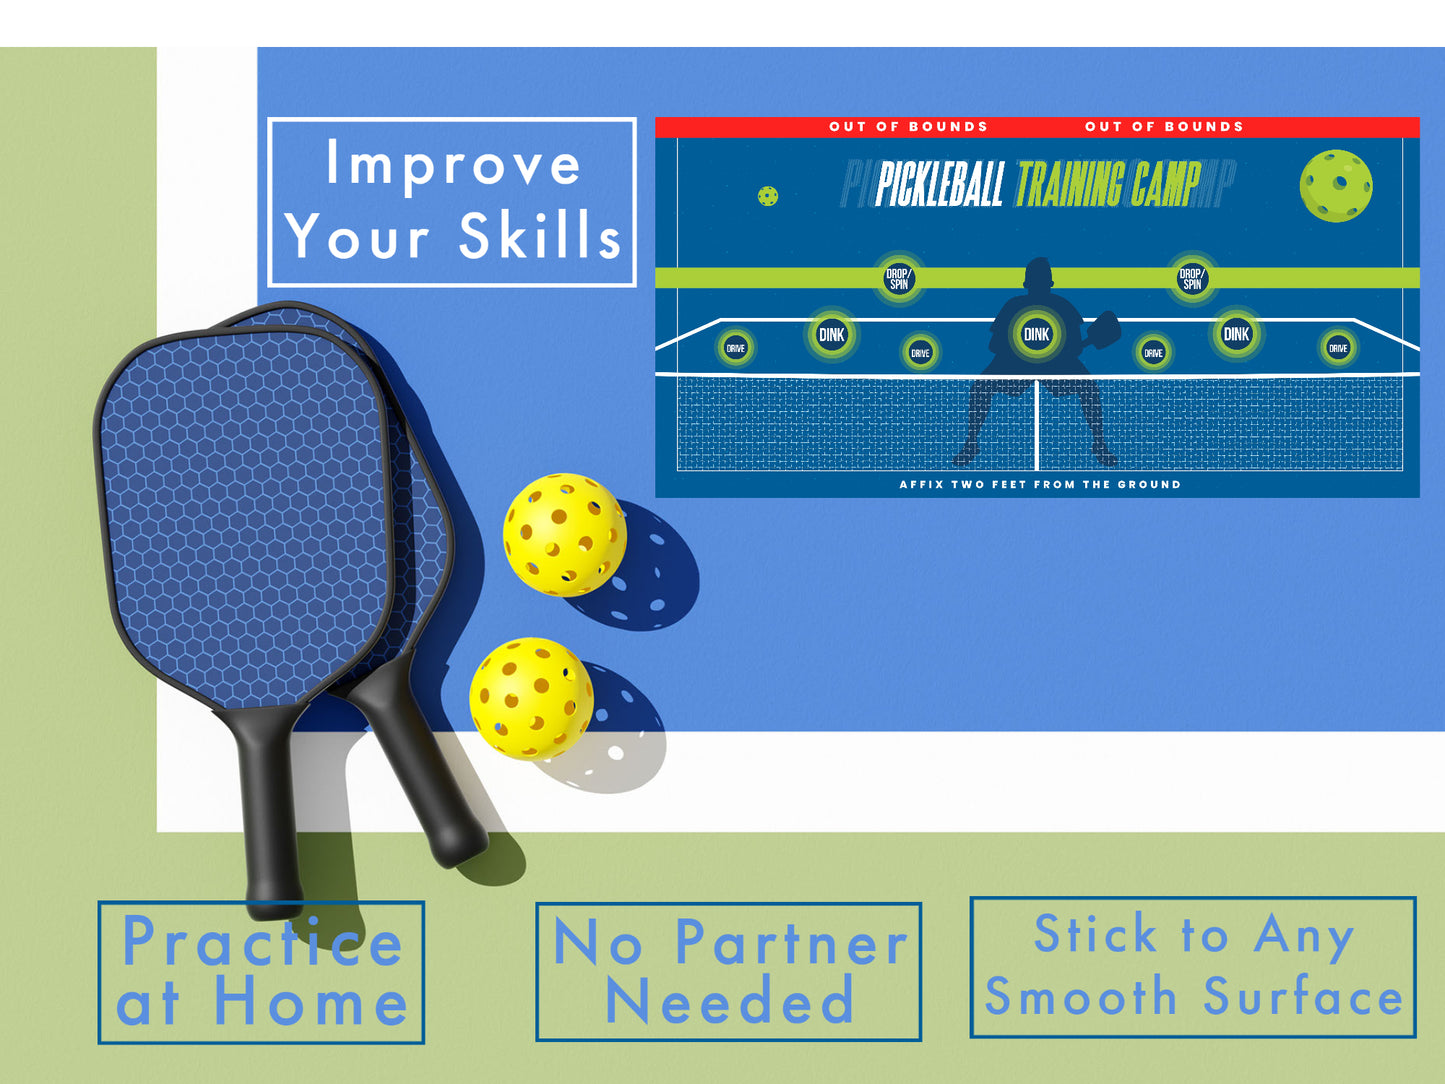 Ultimate Pickleball Rebounder Training Aid | Improve Your Dinks and Elevate Your Game | Convert Any Wall into a Pickleball Court